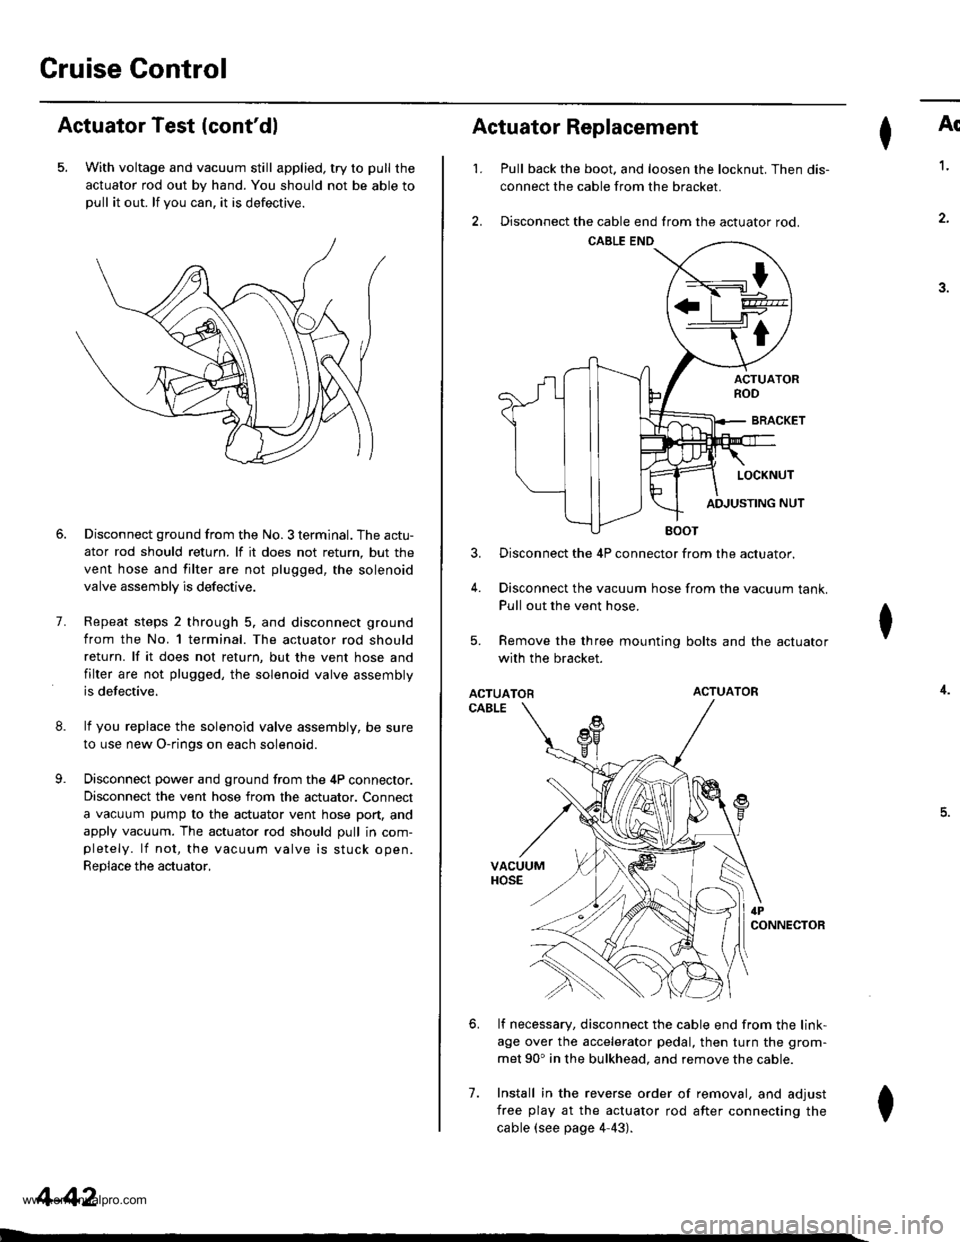 HONDA CR-V 1998 RD1-RD3 / 1.G Workshop Manual 
Cruise Gontrol
Actuator Test (contdl
5. With voltage and vacuum still applied, try to pull the
actuator rod out by hand. You should not be able topull it out. lf you can. it is defectrve.
8.
9.
7.
D